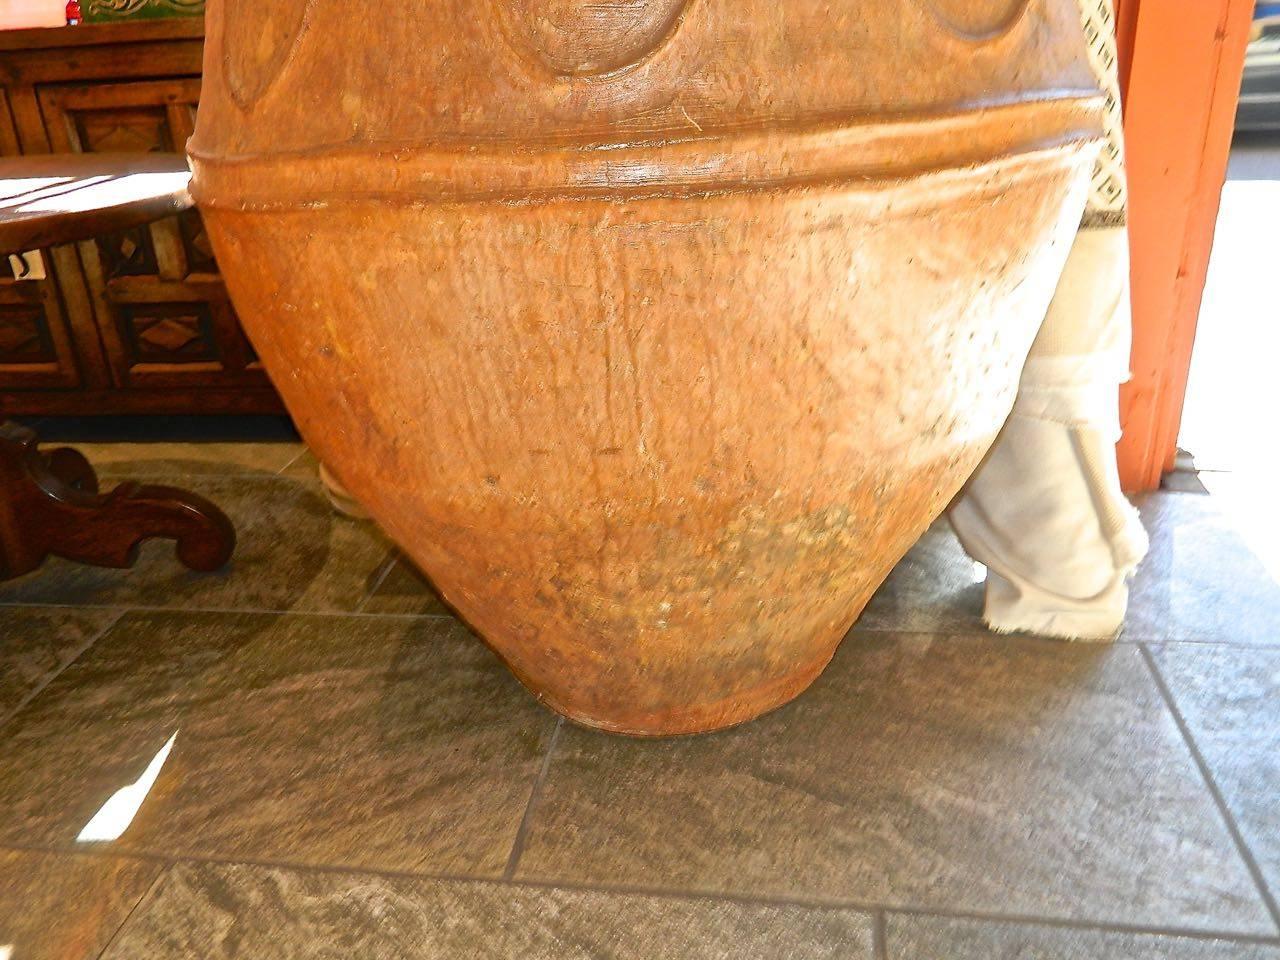 Hand-Crafted Large 18th Century Spanish Terracotta Water Jar